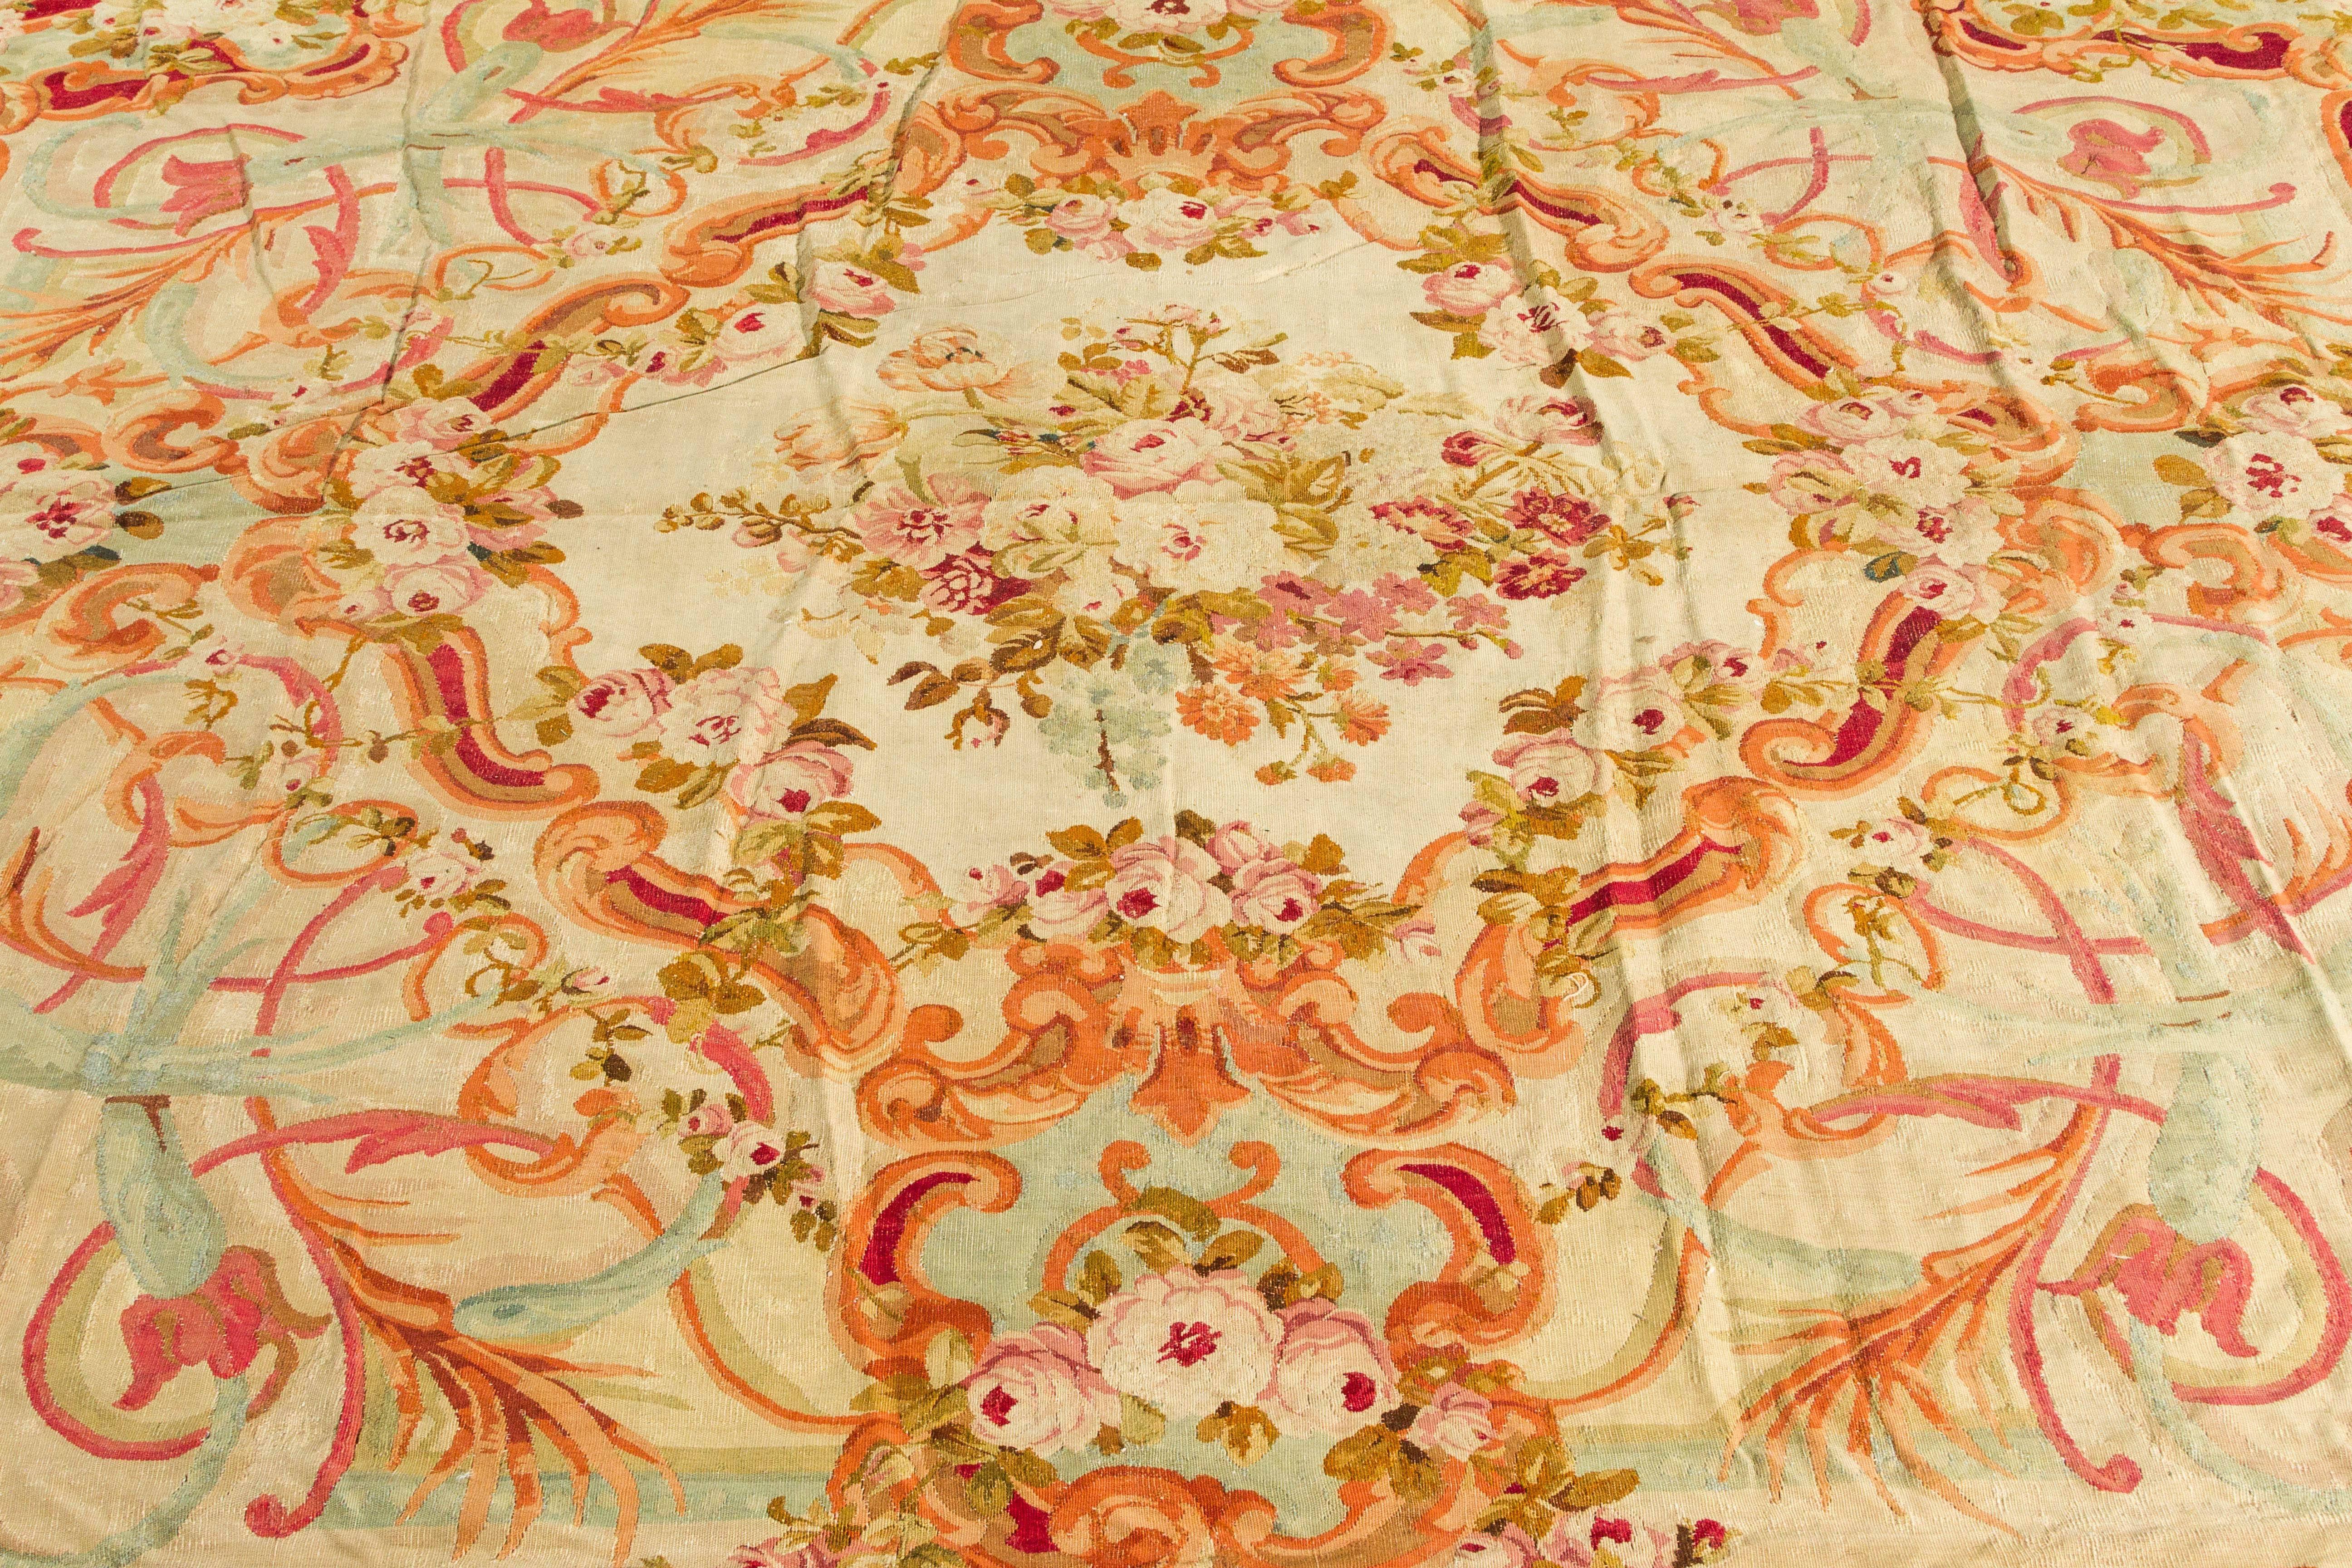 Aubusson French rug
Measurement: 12'6